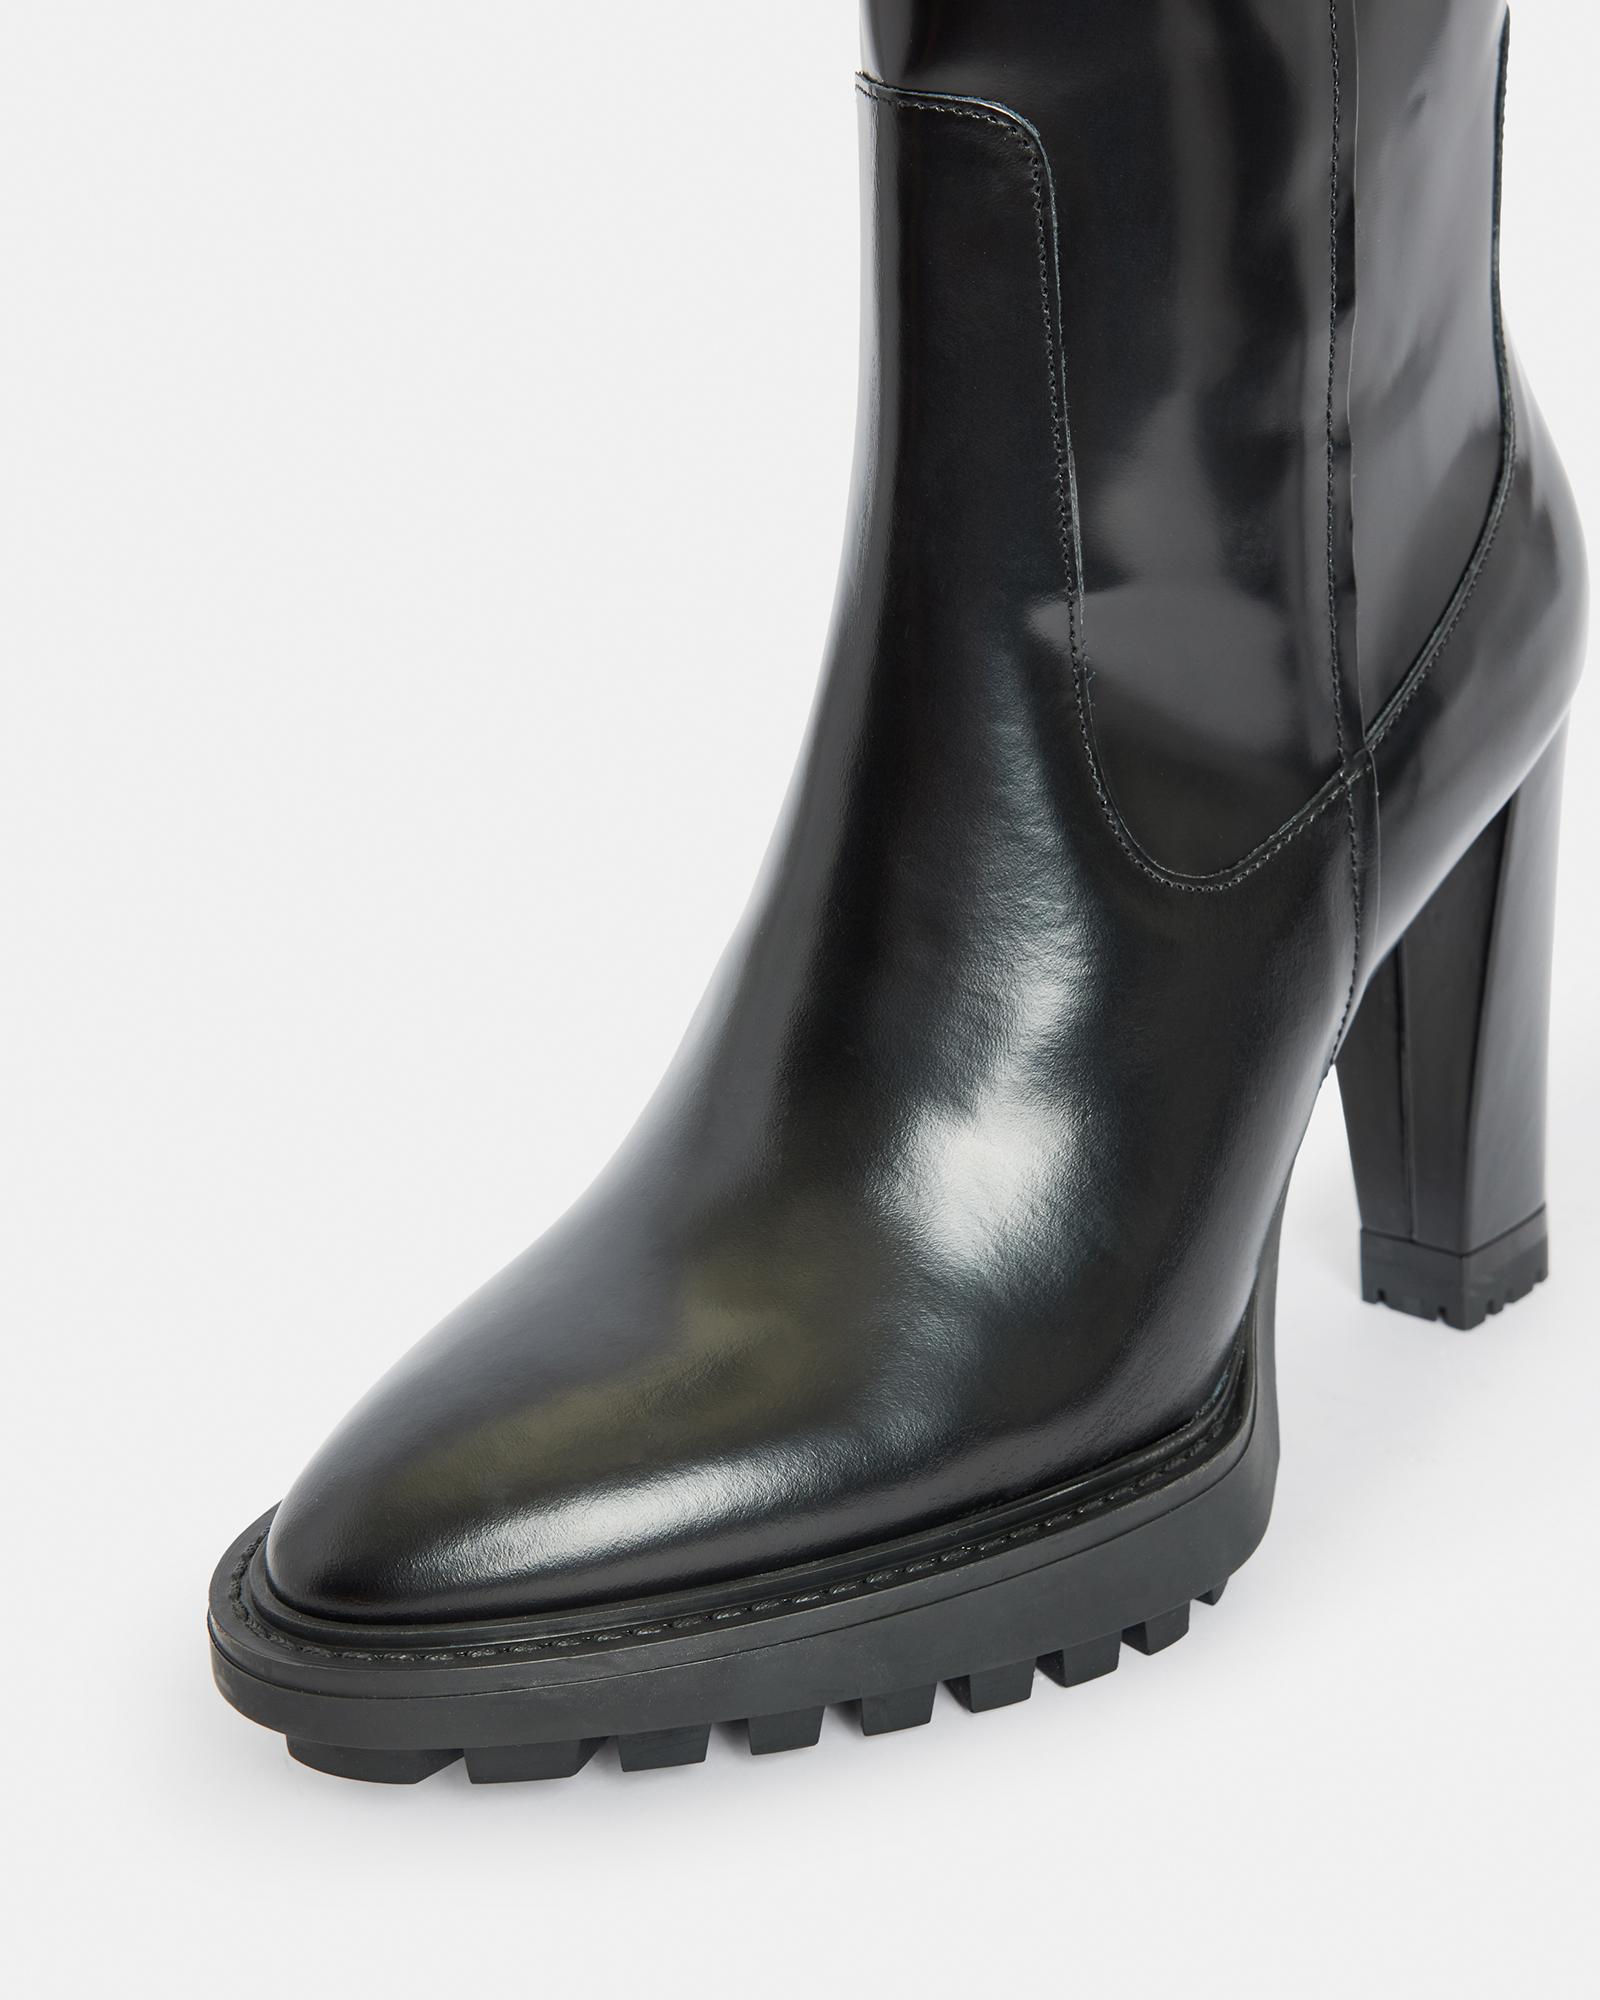 AllSaints Harlem Knee High Leather Boots in Black | Lyst